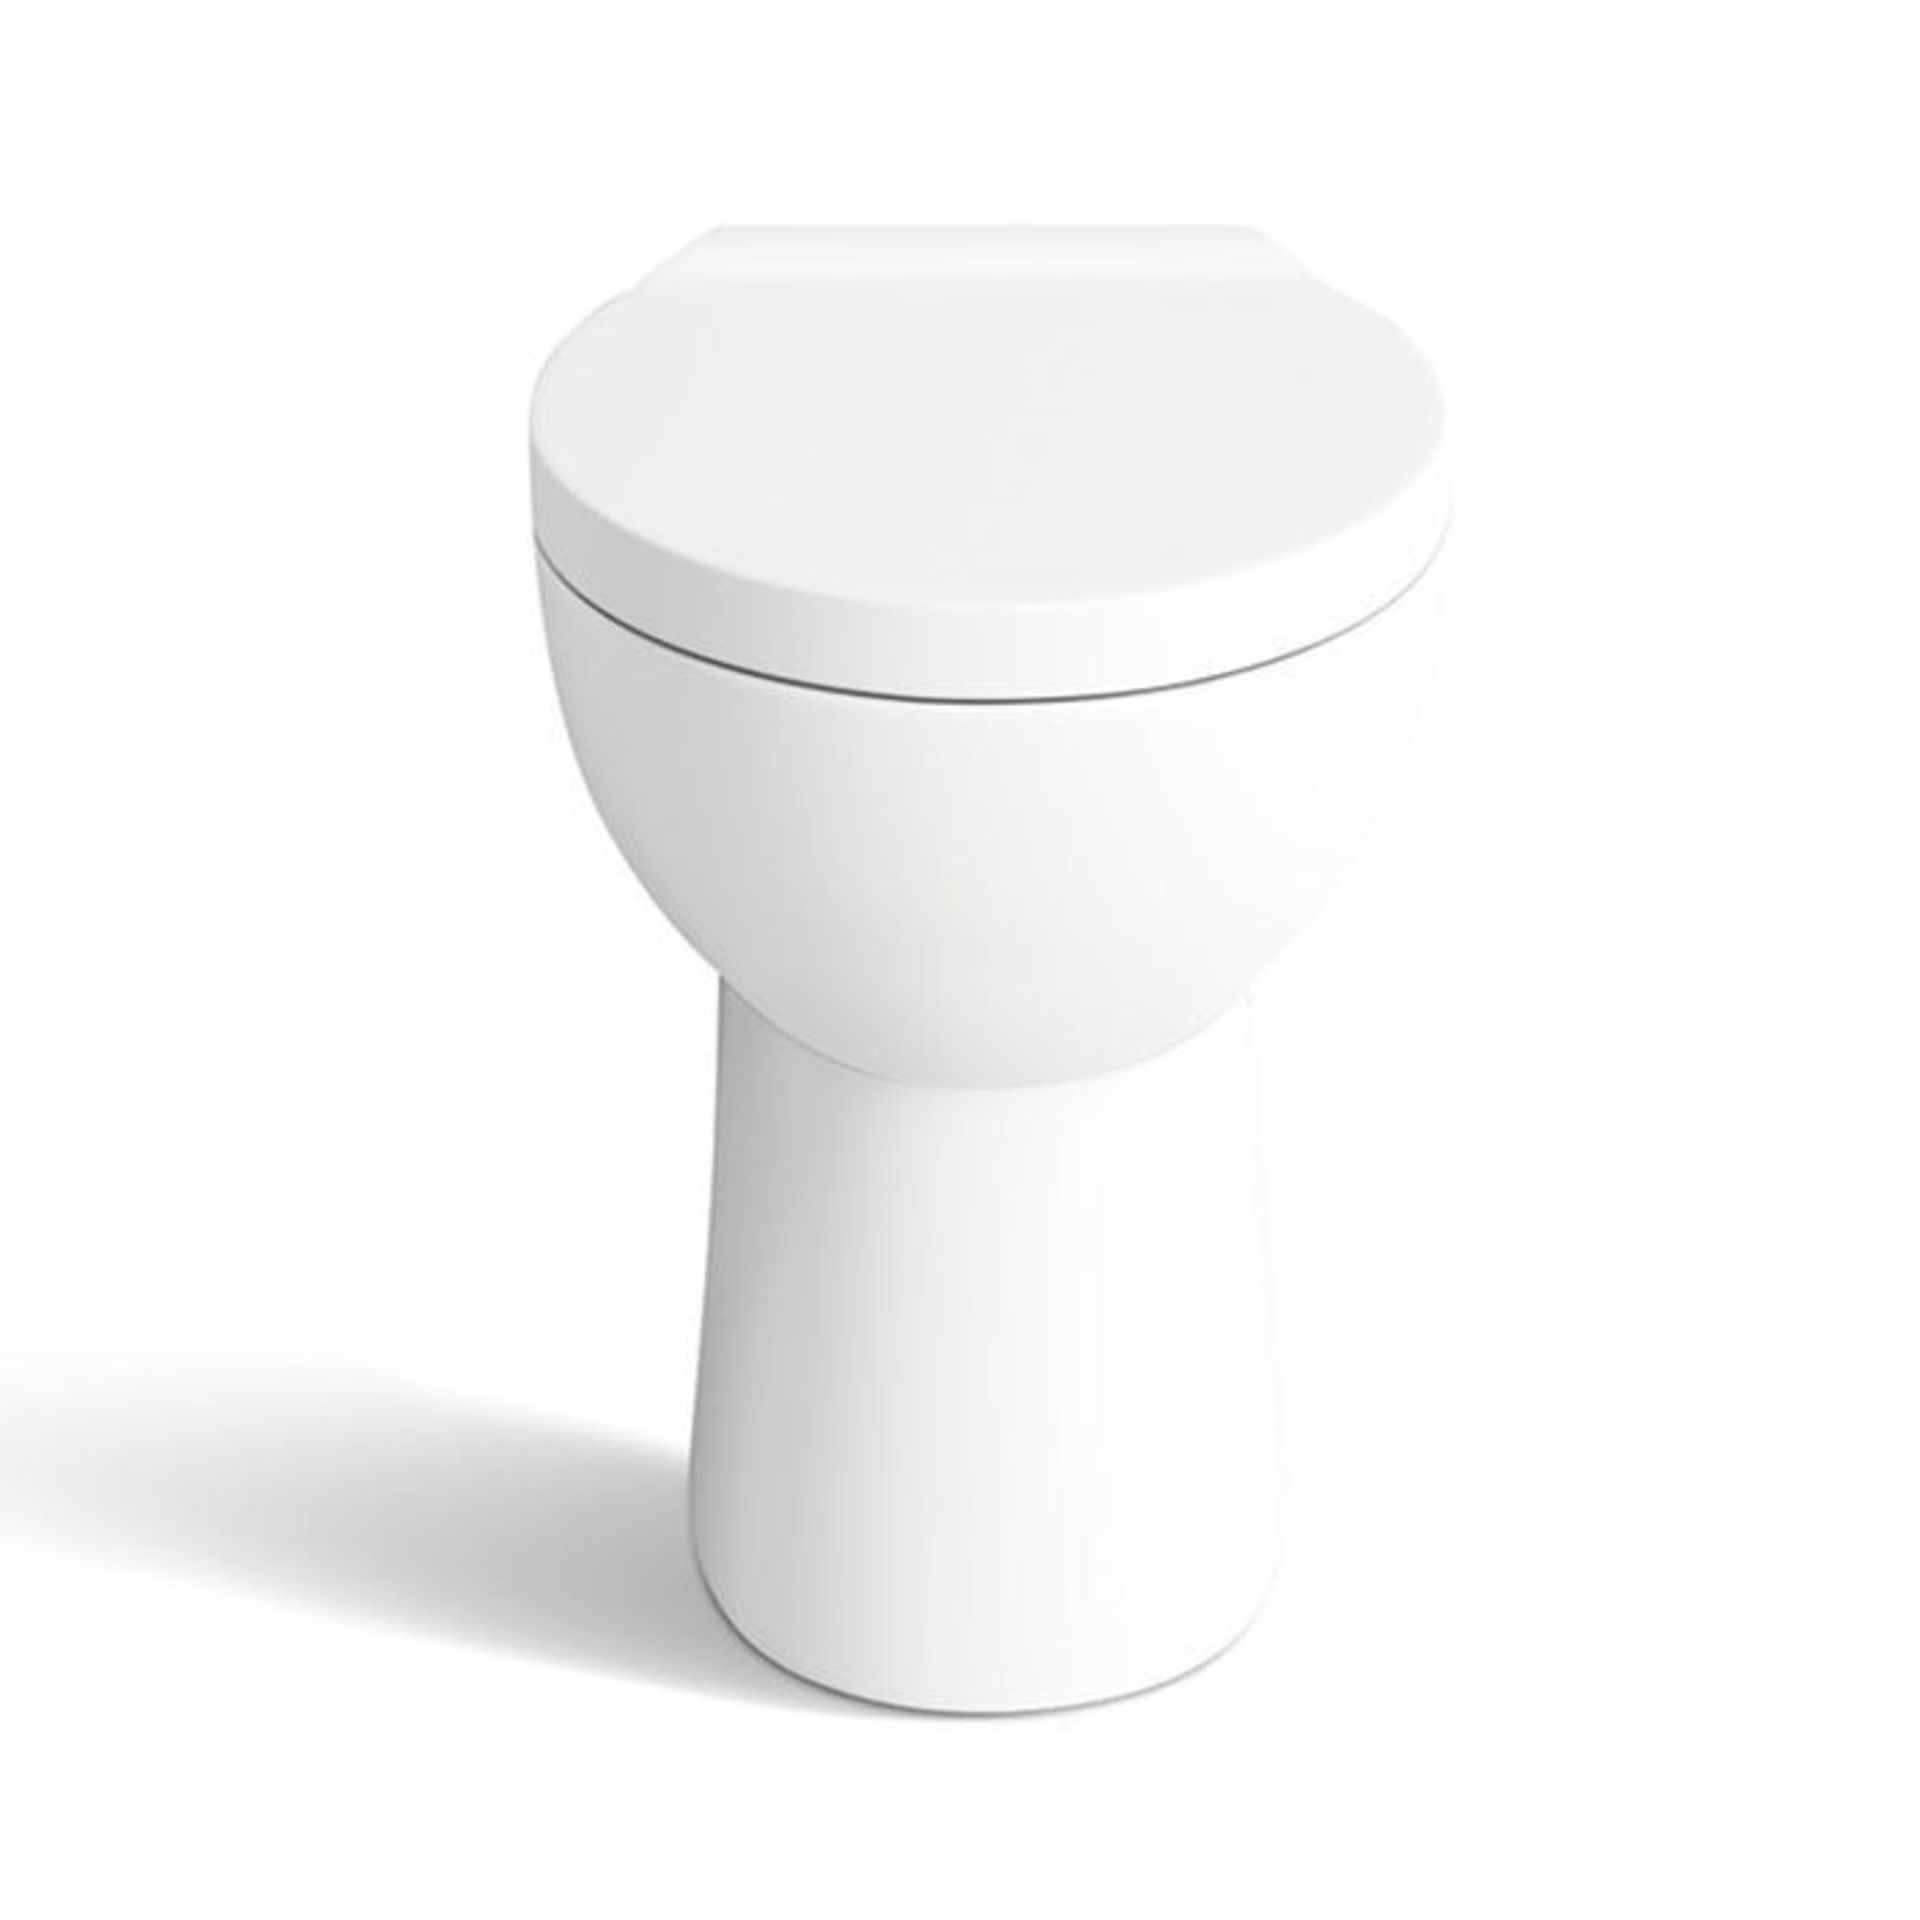 NEW Quartz Back to Wall Toilet.Stylish design Made from White Vitreous China Finished in a high... - Image 2 of 2